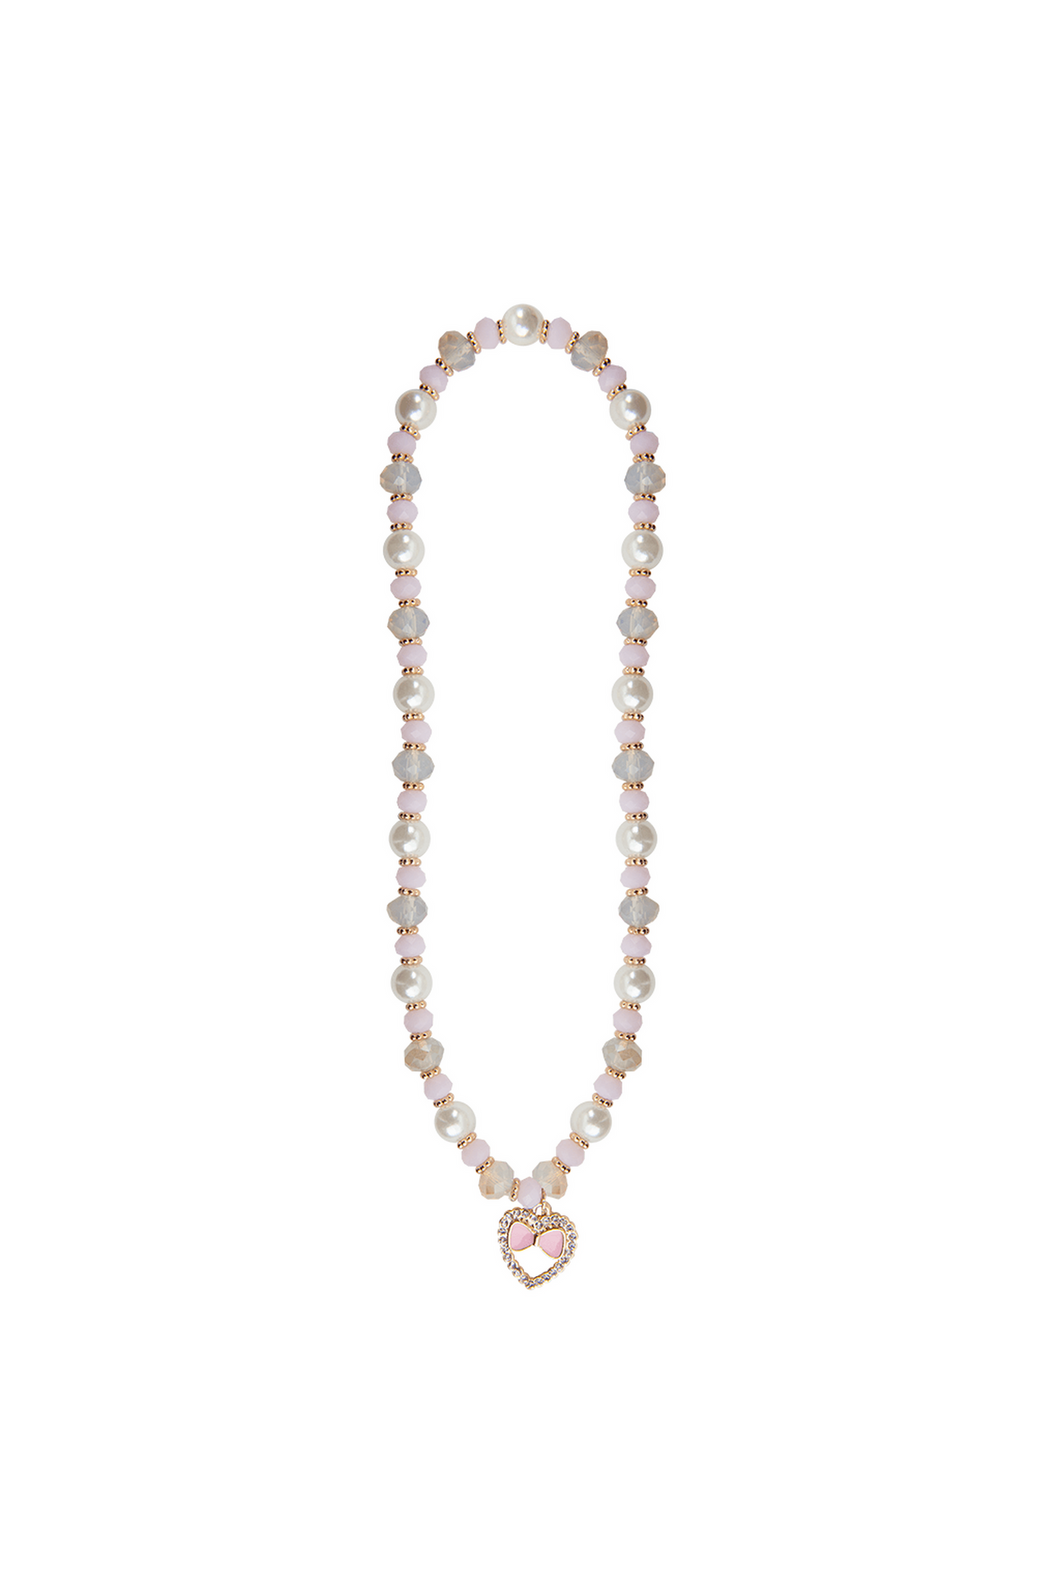 Boutique Love Necklace by Great Pretenders